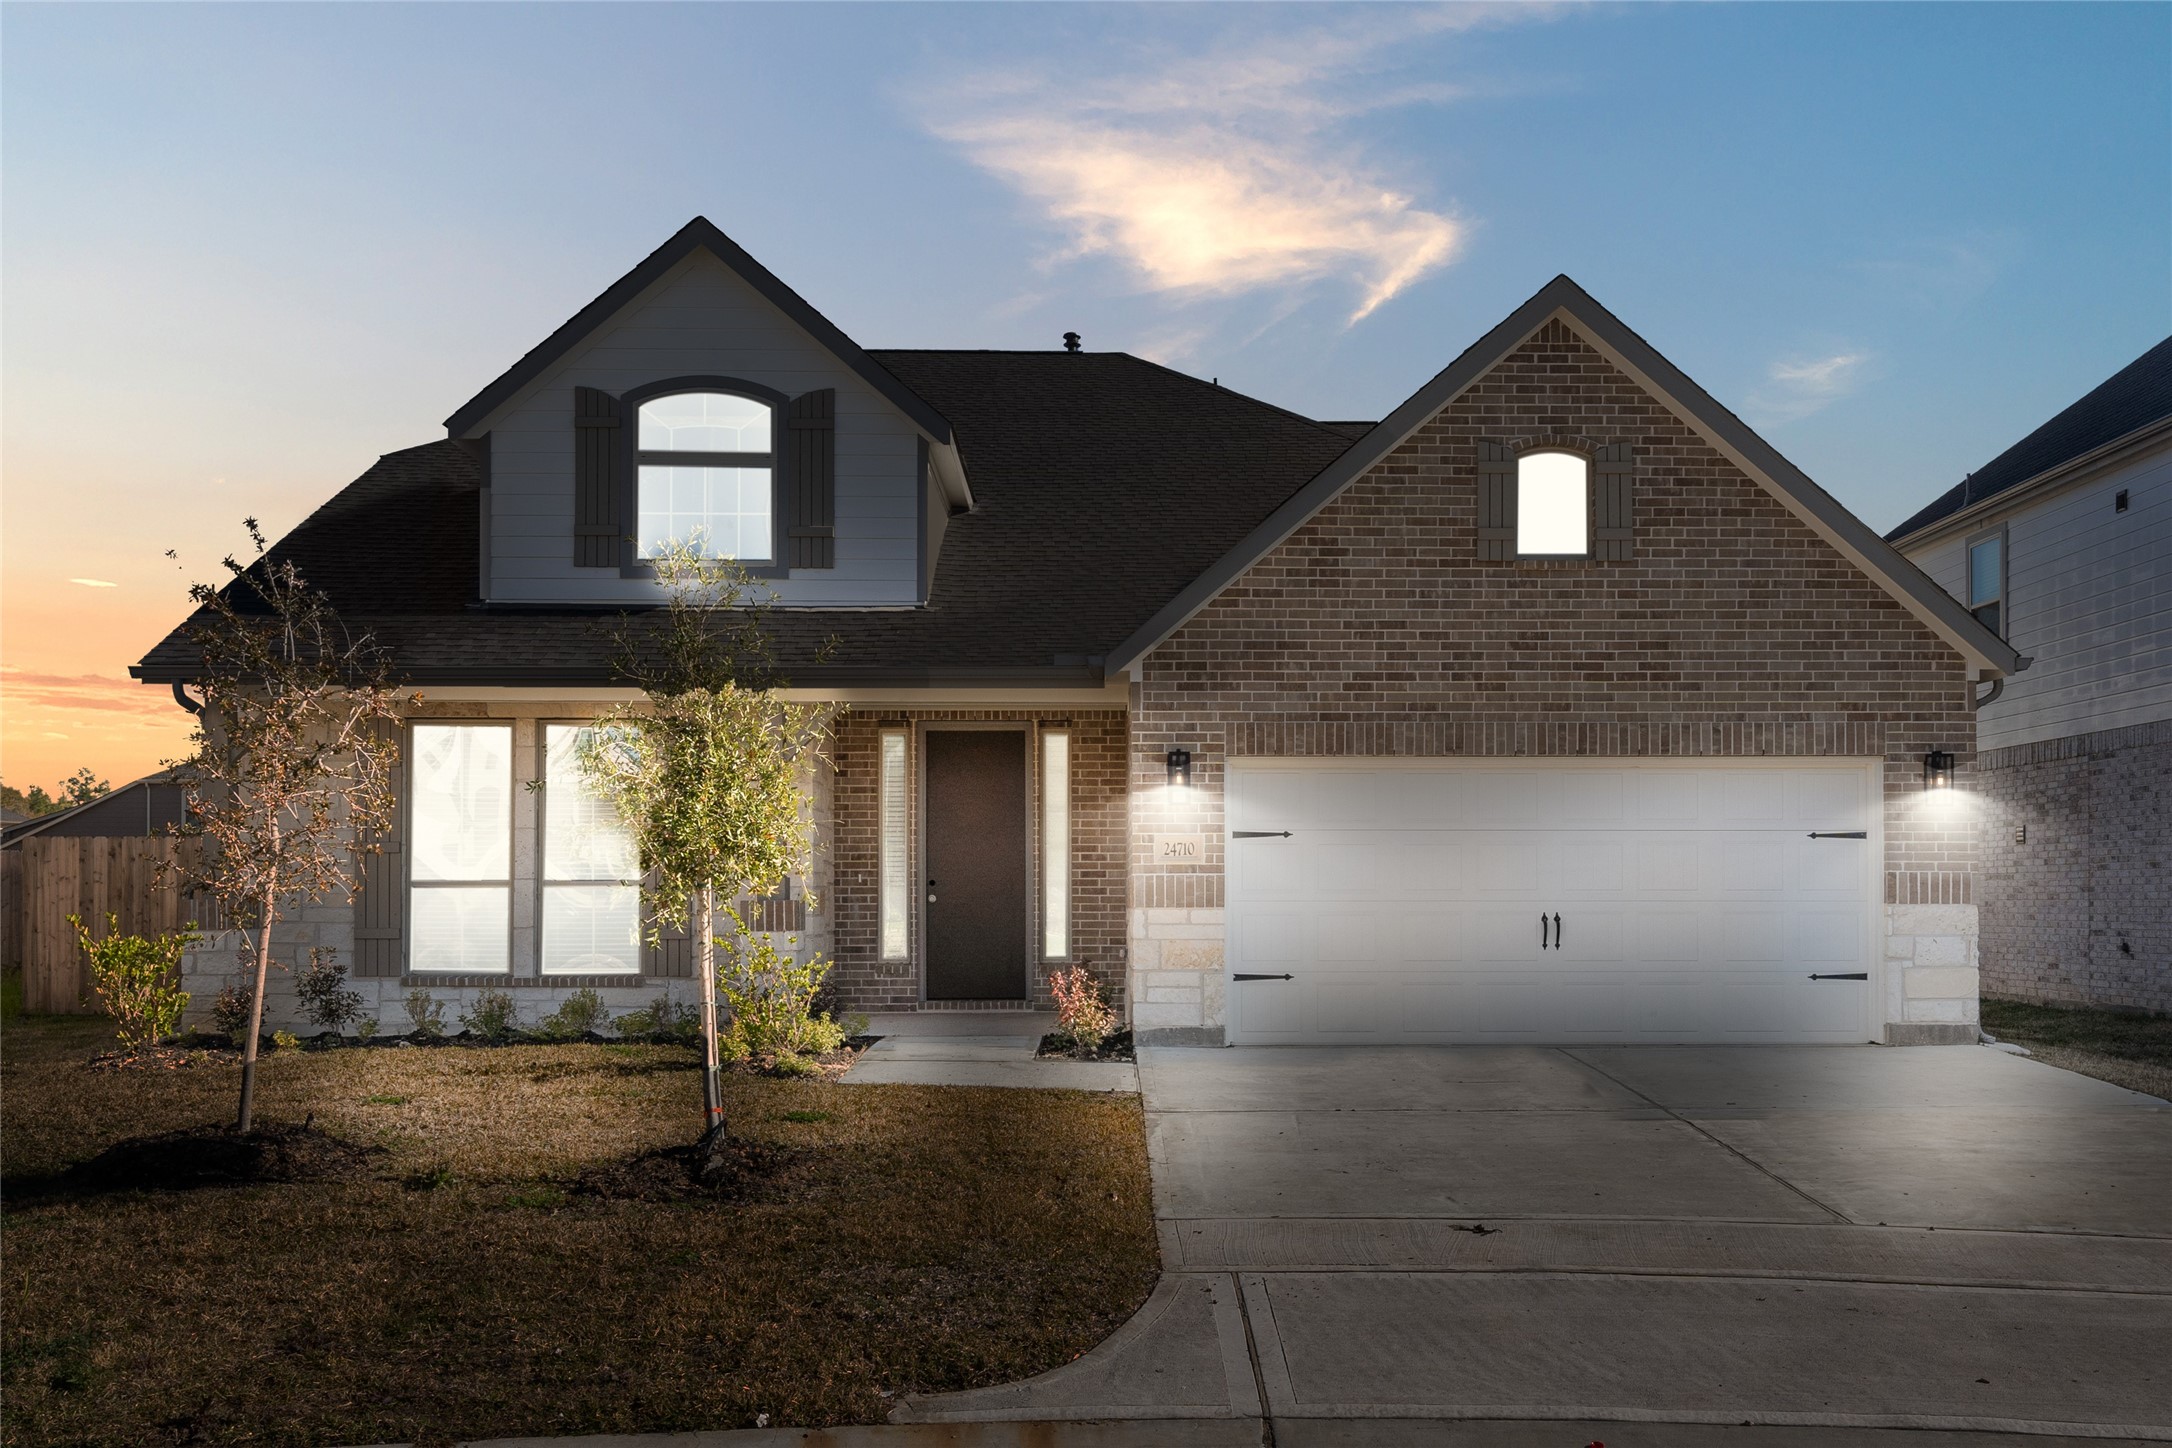 Welcome home to 24710 Miltonwood Street located in the community of Bradbury Forest and zoned to Spring ISD.